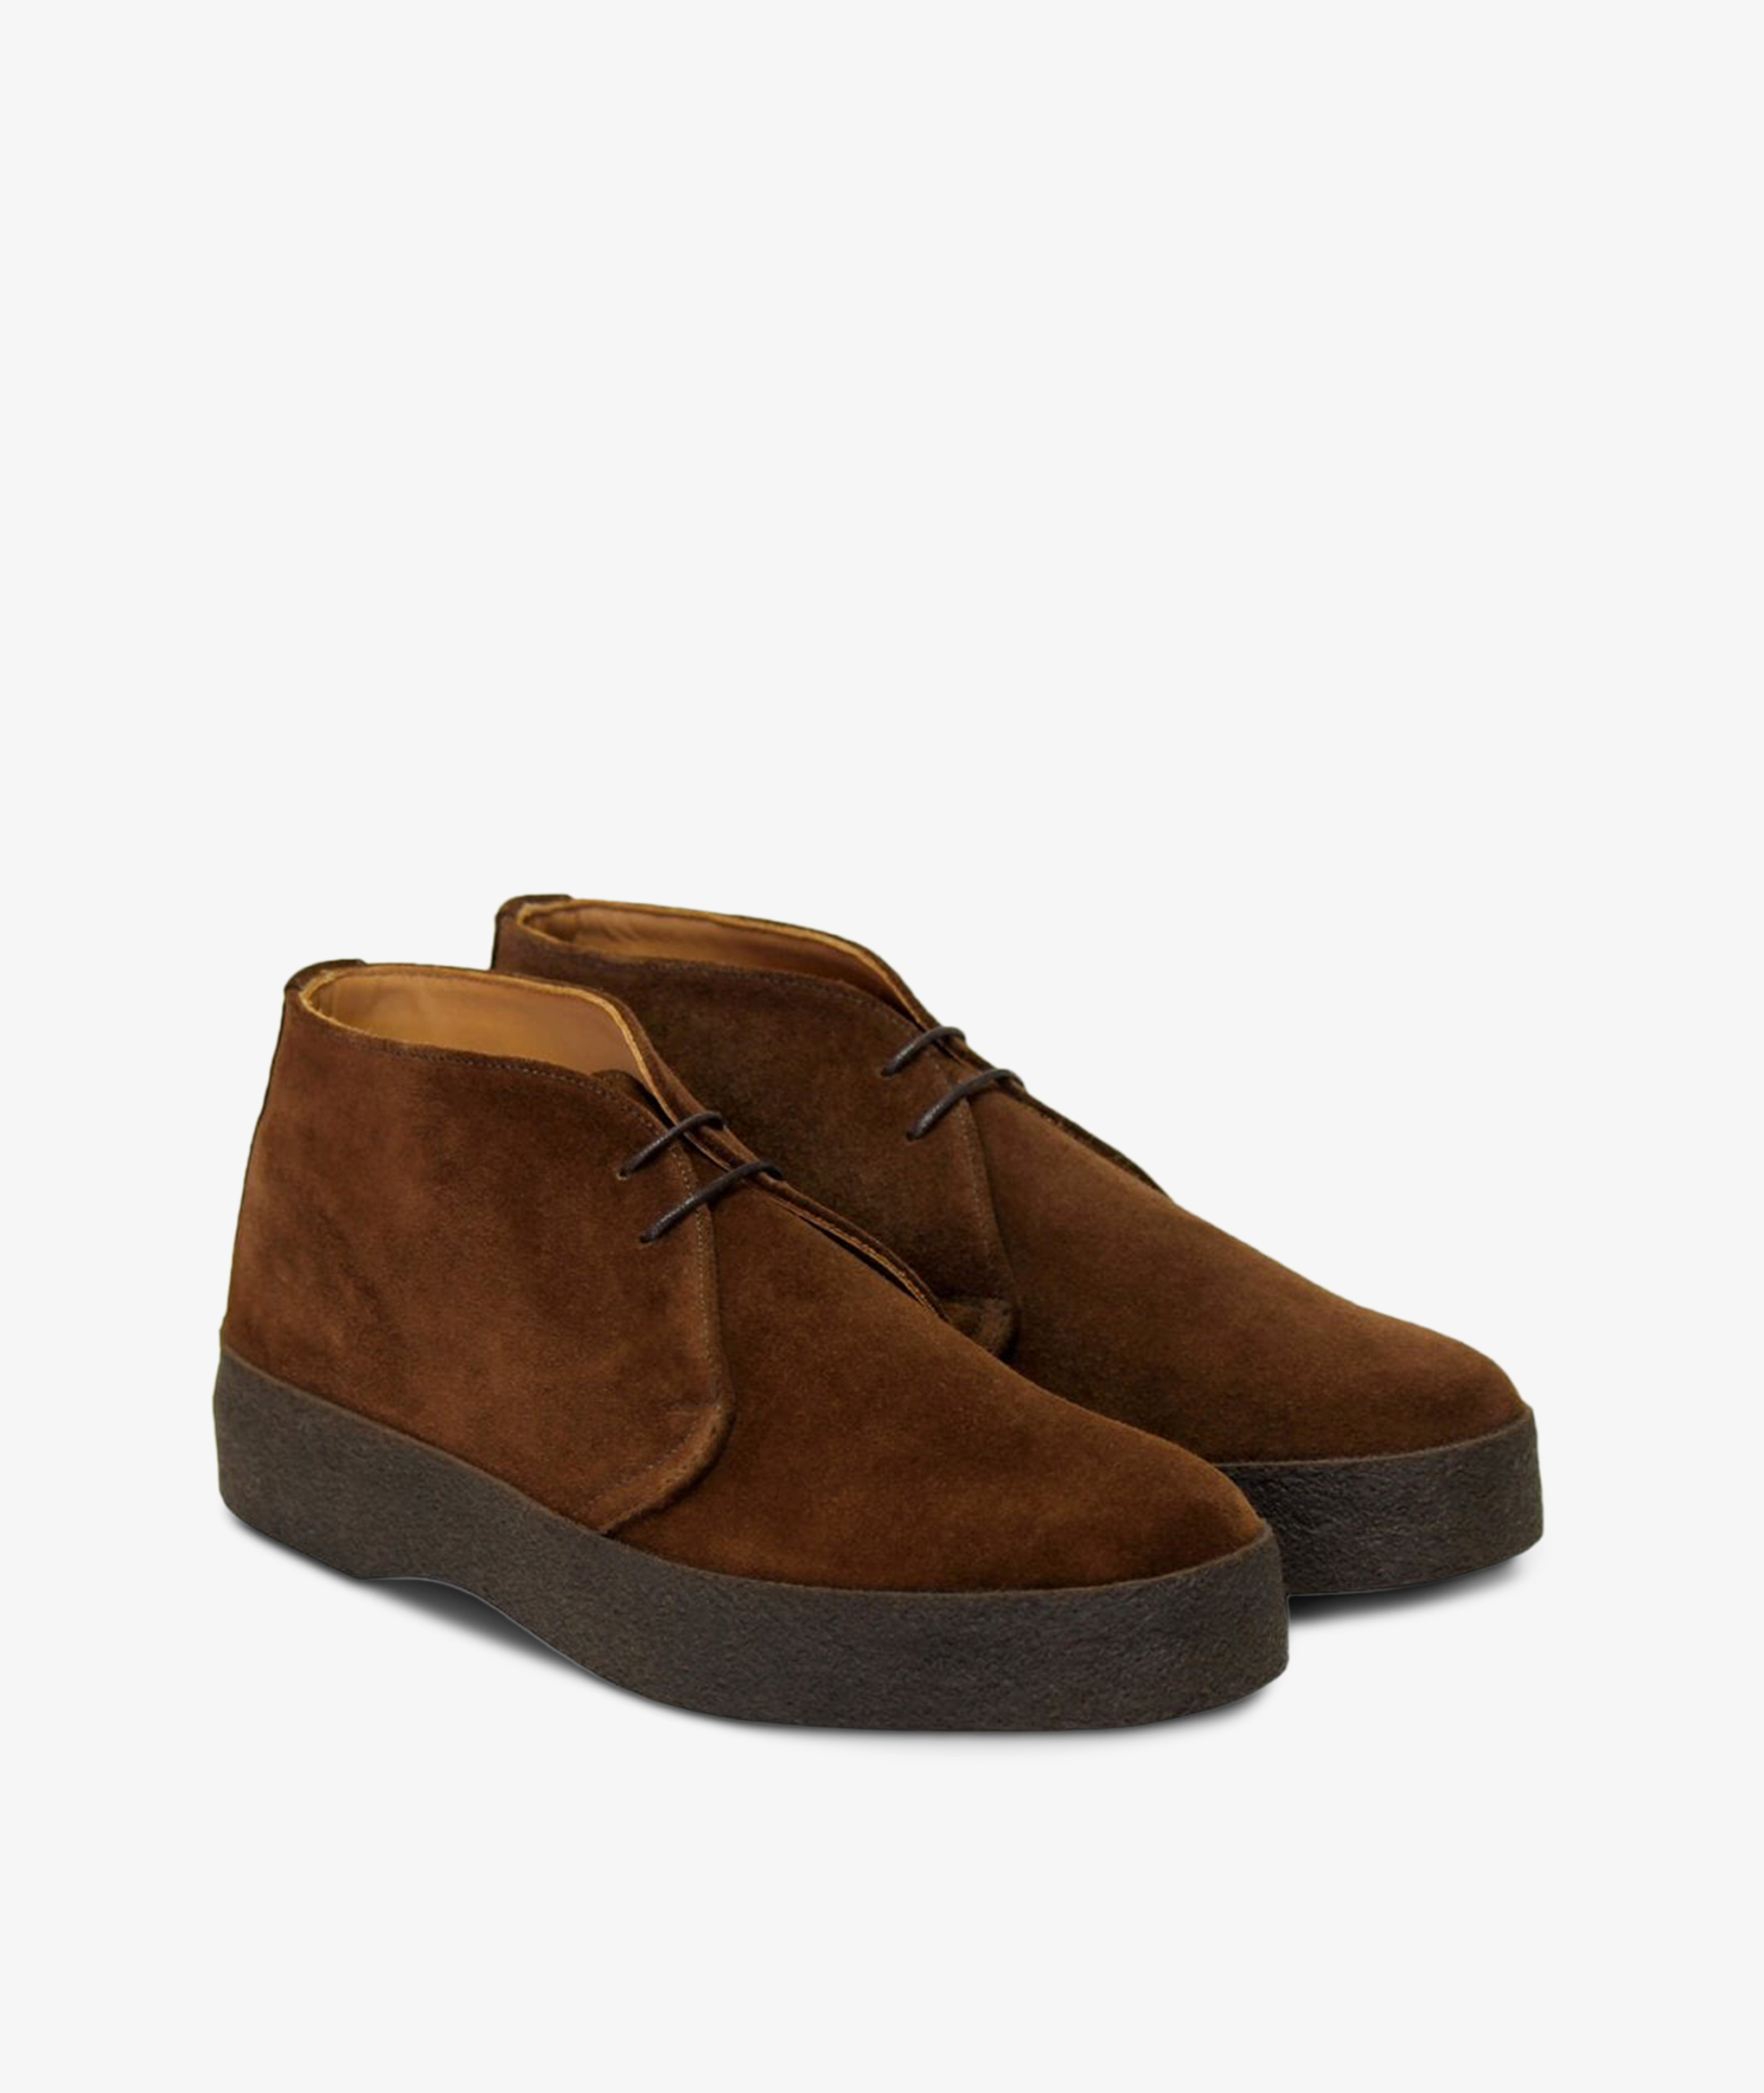 Norse Store | Shipping Worldwide - Sanders Suede Chukka Boot - Polo Snuff